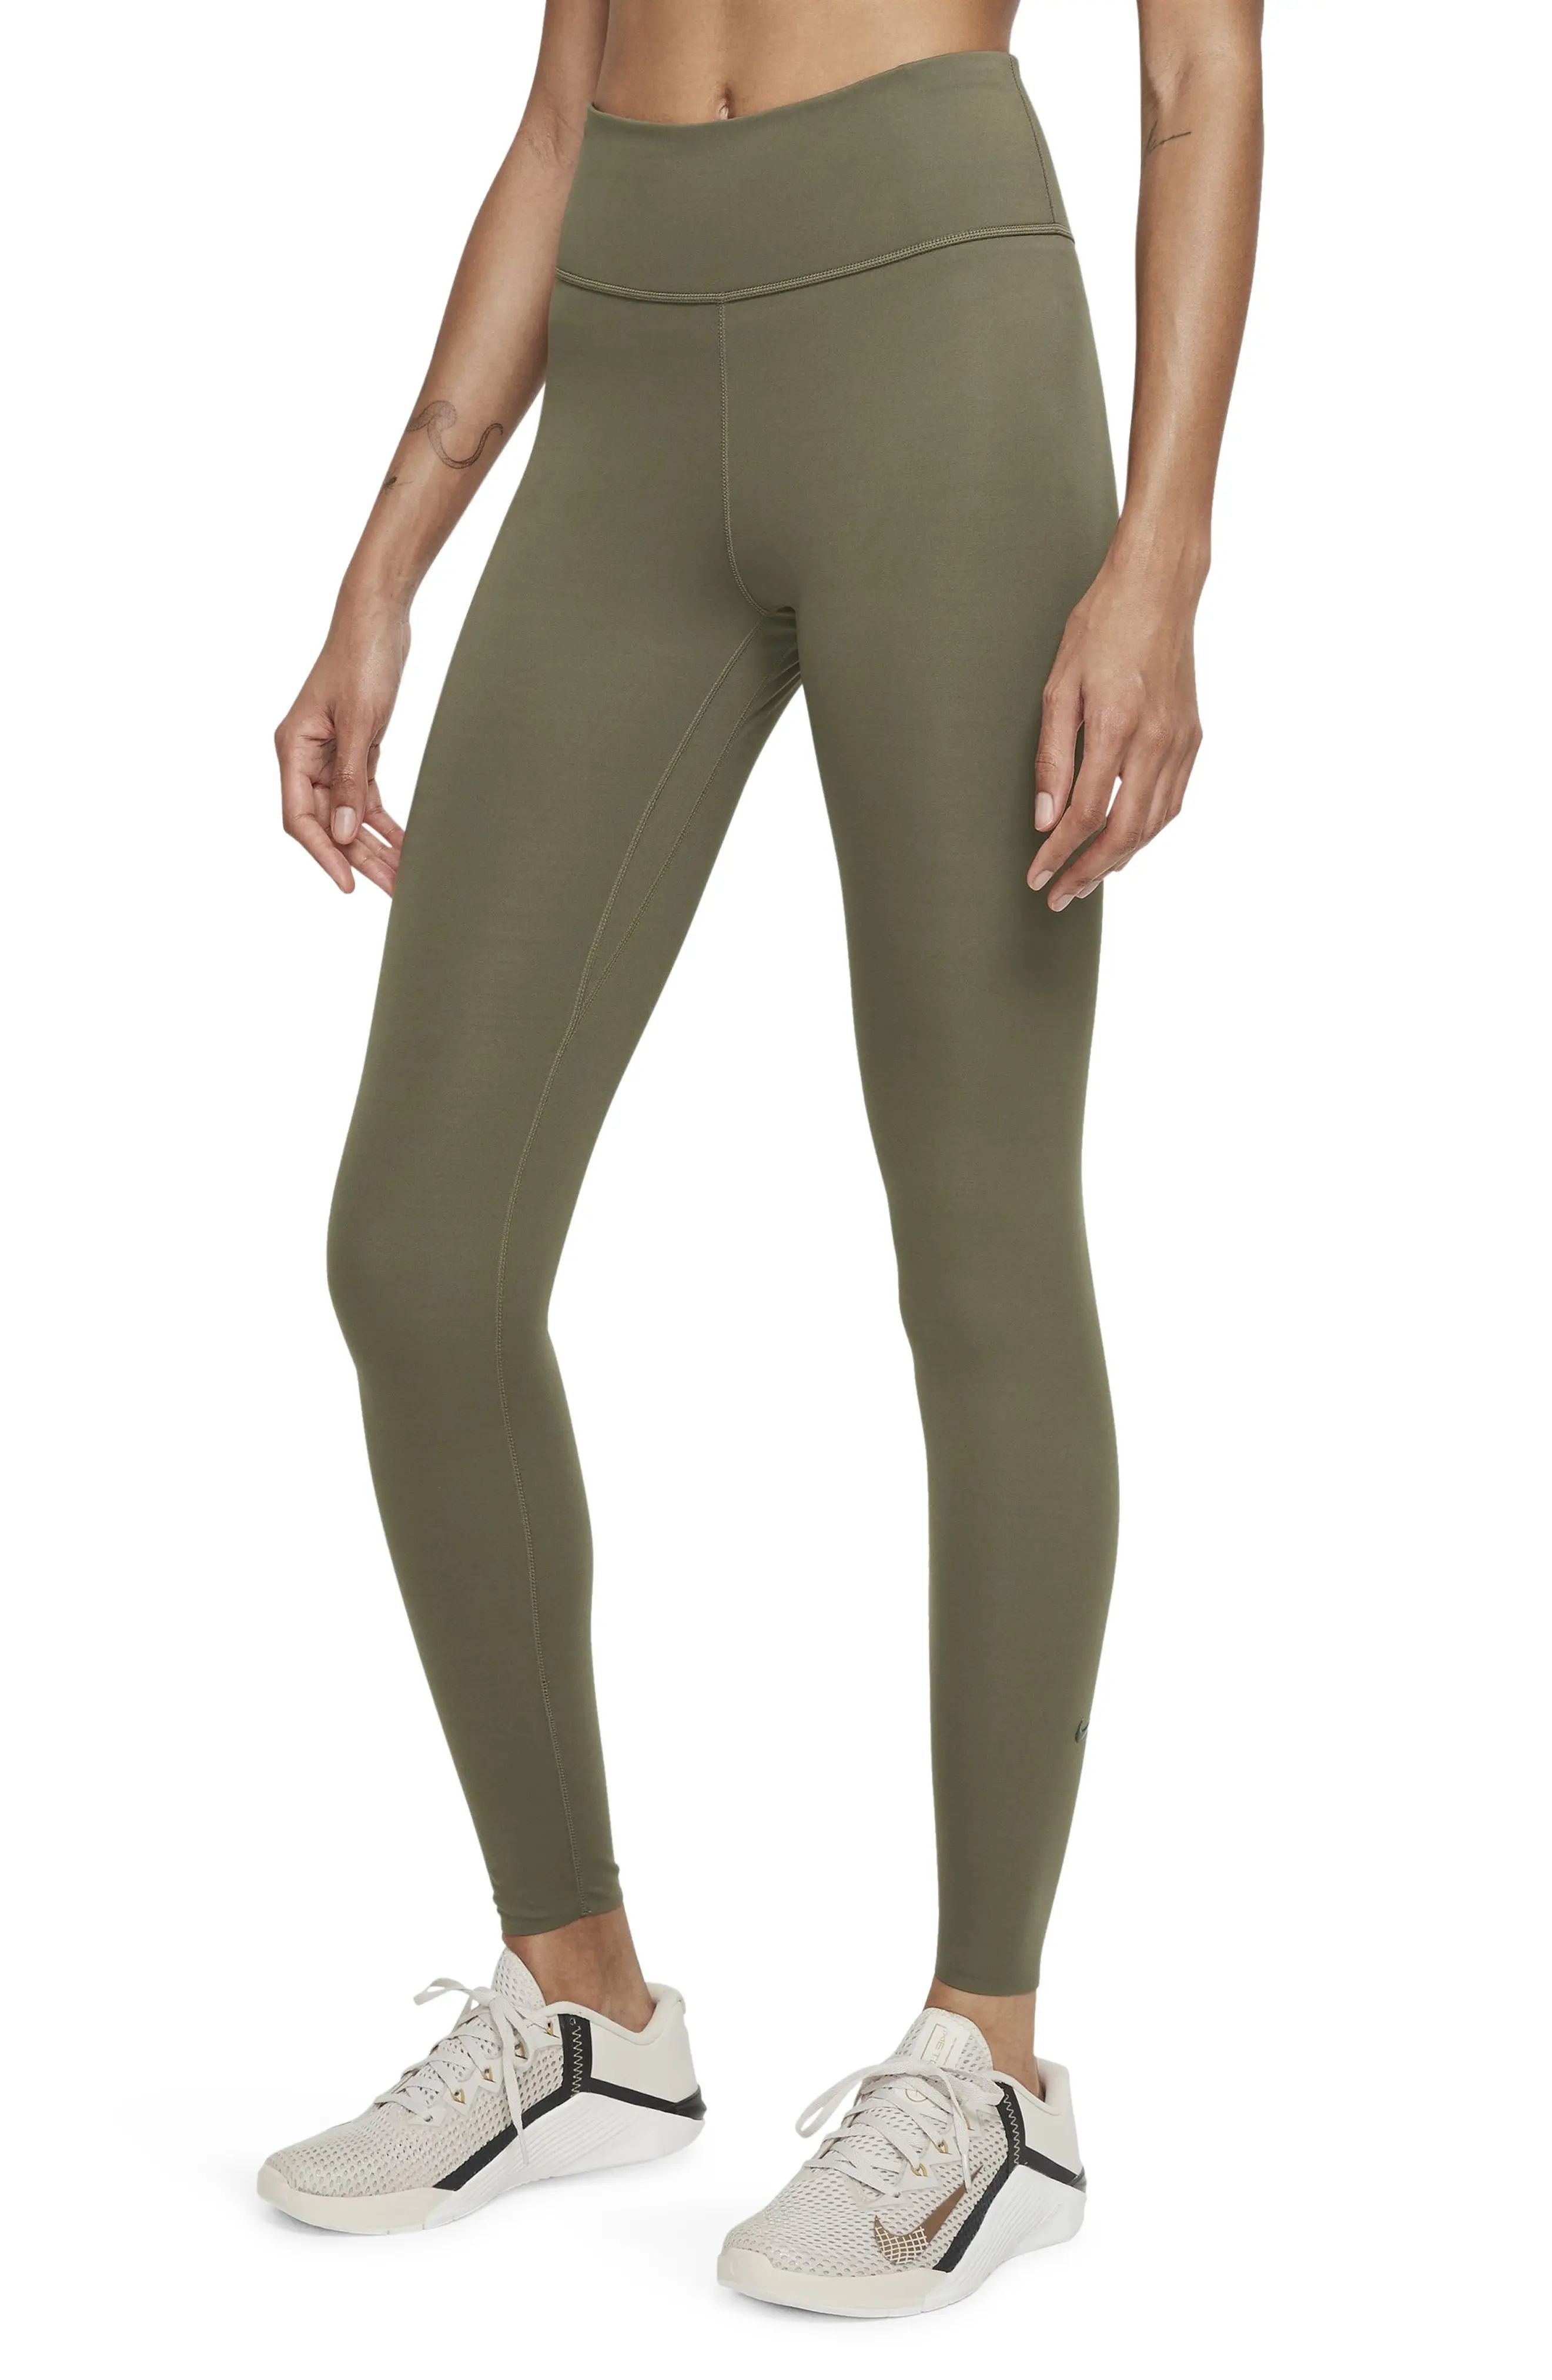 Nike One Luxe Tights in Medium Olive/Clear at Nordstrom, Size X-Small | Nordstrom